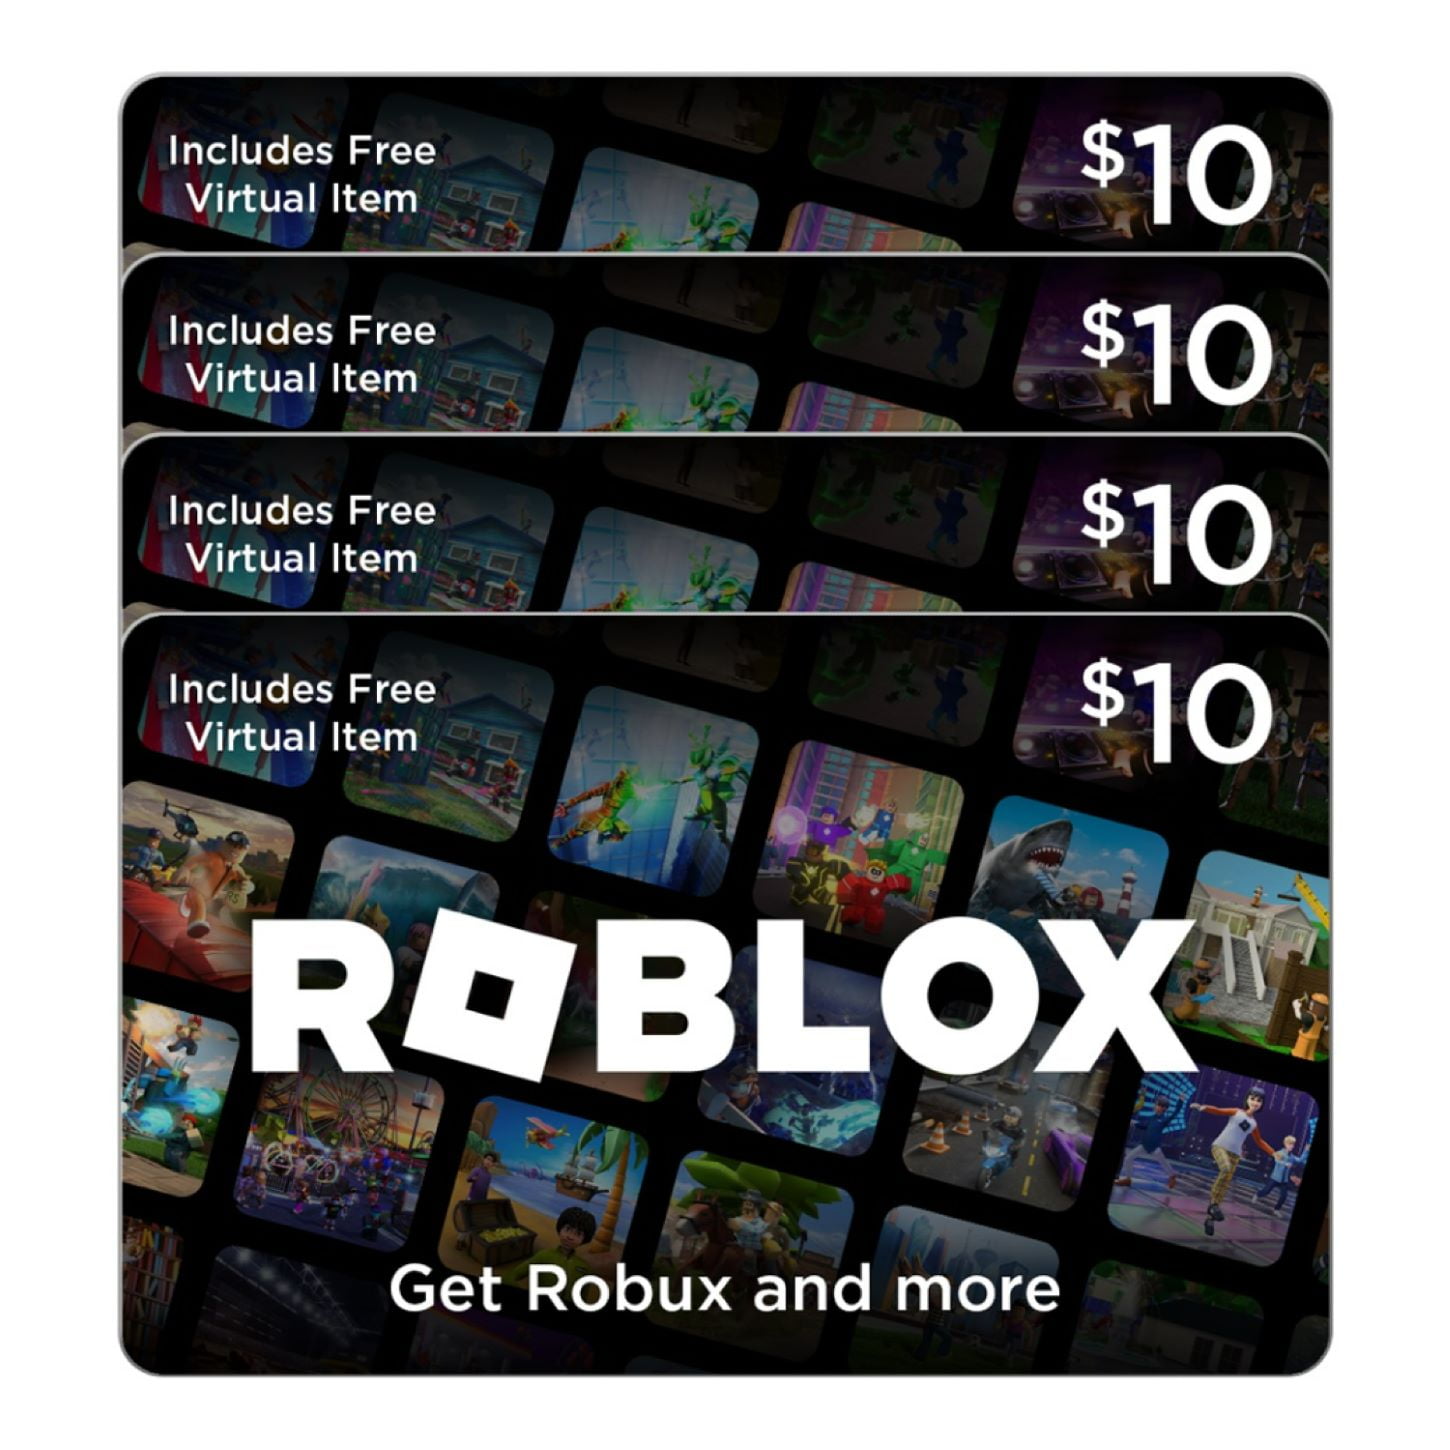 Roblox 10,000 Robux Gift Code - USA Accounts ONLY - Exclusive Virtual Item  CHEAP